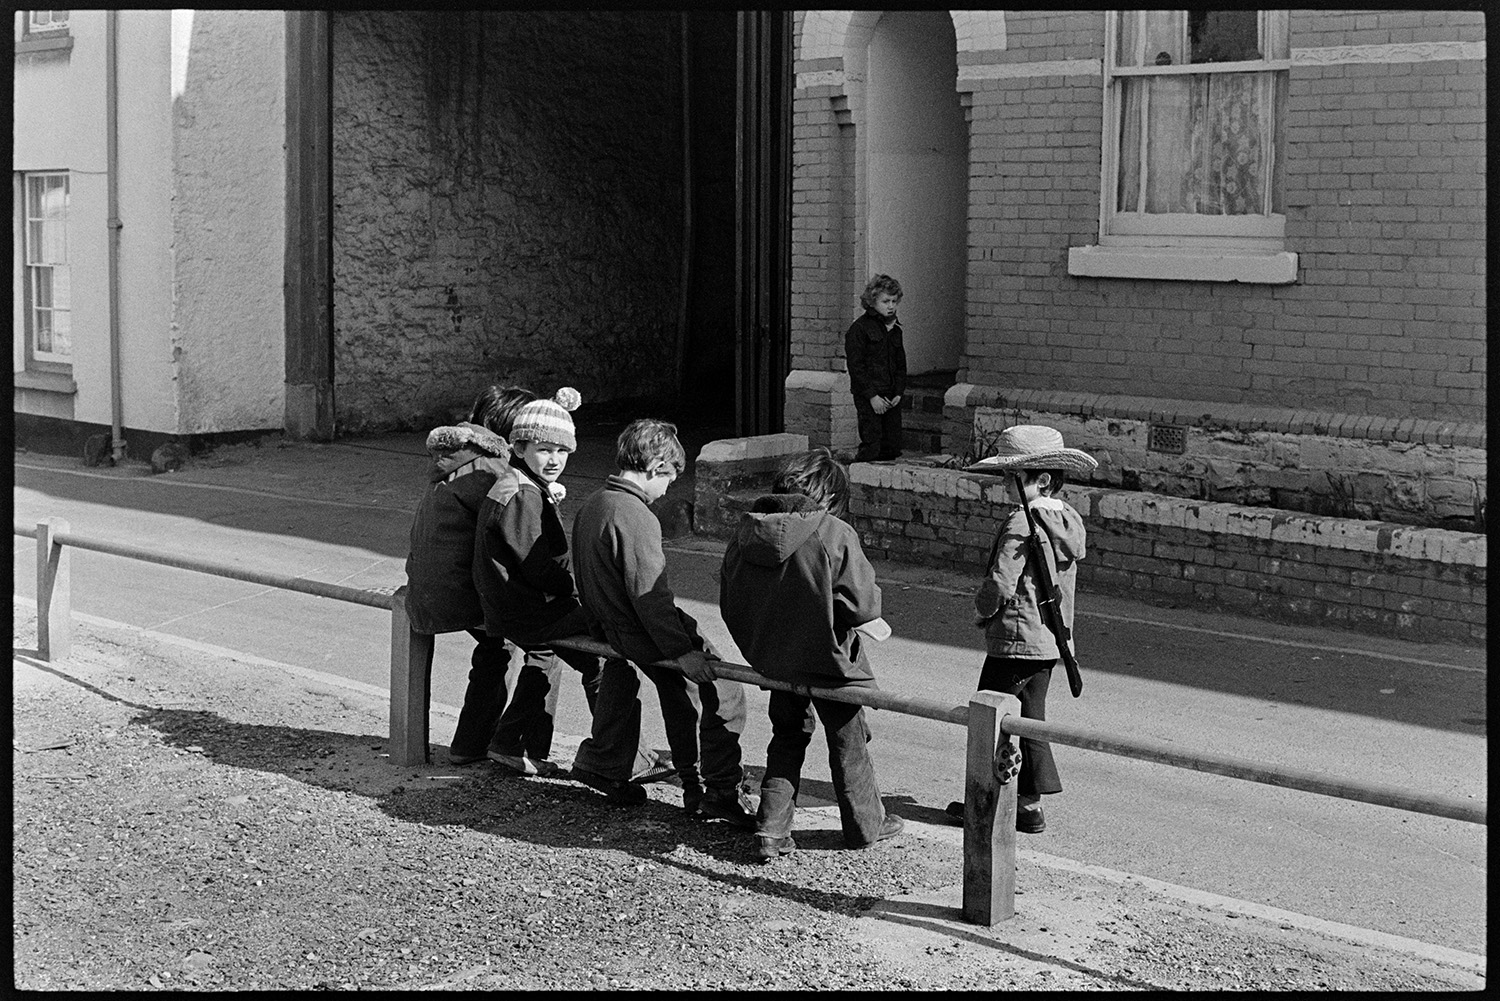 Street scenes. Children and old houses before development.
[Children sitting on a rail by Tuly Street, Barnstaple. One boy is waiting at a door on the opposite side of the street, and another boy is wearing a hat and carrying a toy gun.]